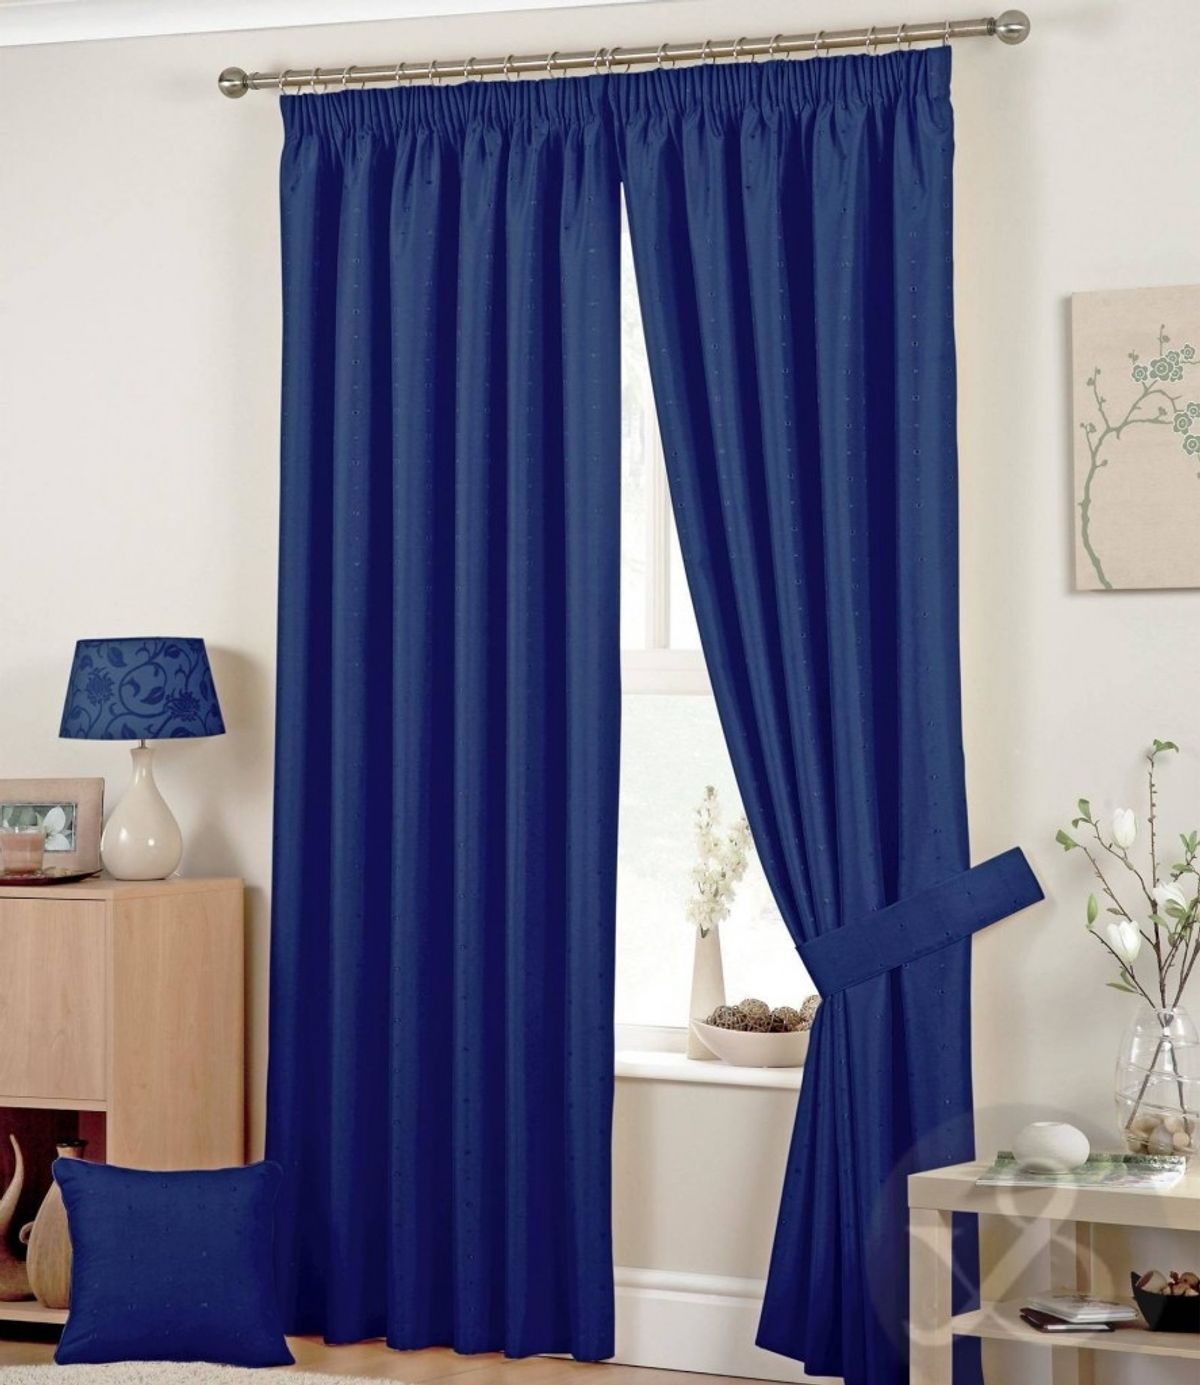 Blue Curtains For Bedroom Navy Uk With White And Interalle Inside Blue Bedroom Curtains ?width=1200